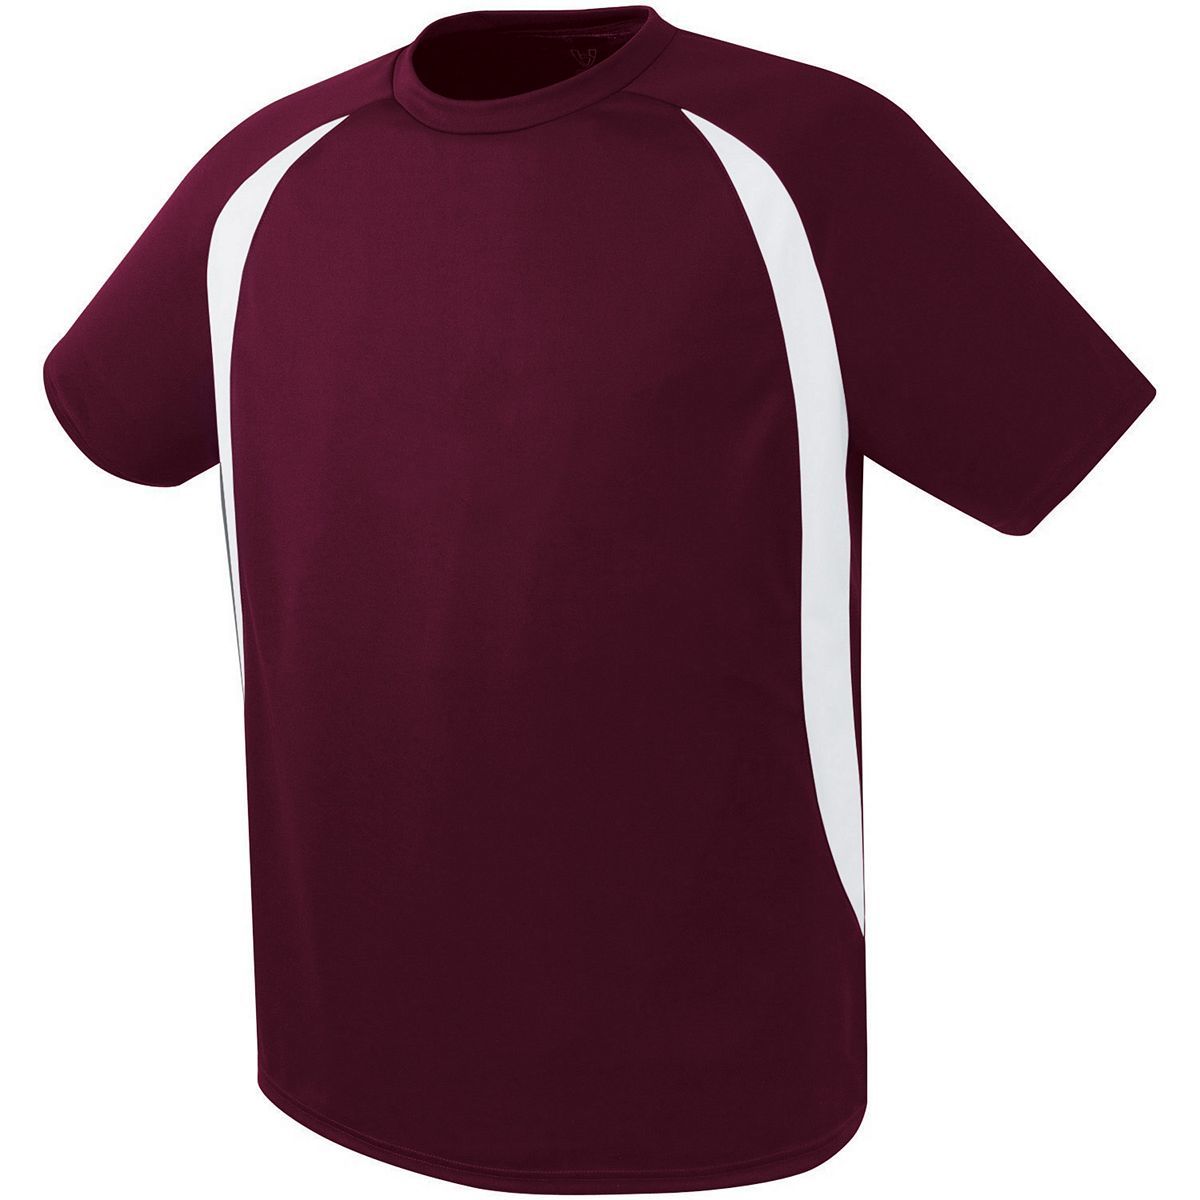 High 5 Youth Liberty Soccer Jersey in Maroon/White  -Part of the Youth, Youth-Jersey, High5-Products, Soccer, Shirts, All-Sports-1 product lines at KanaleyCreations.com